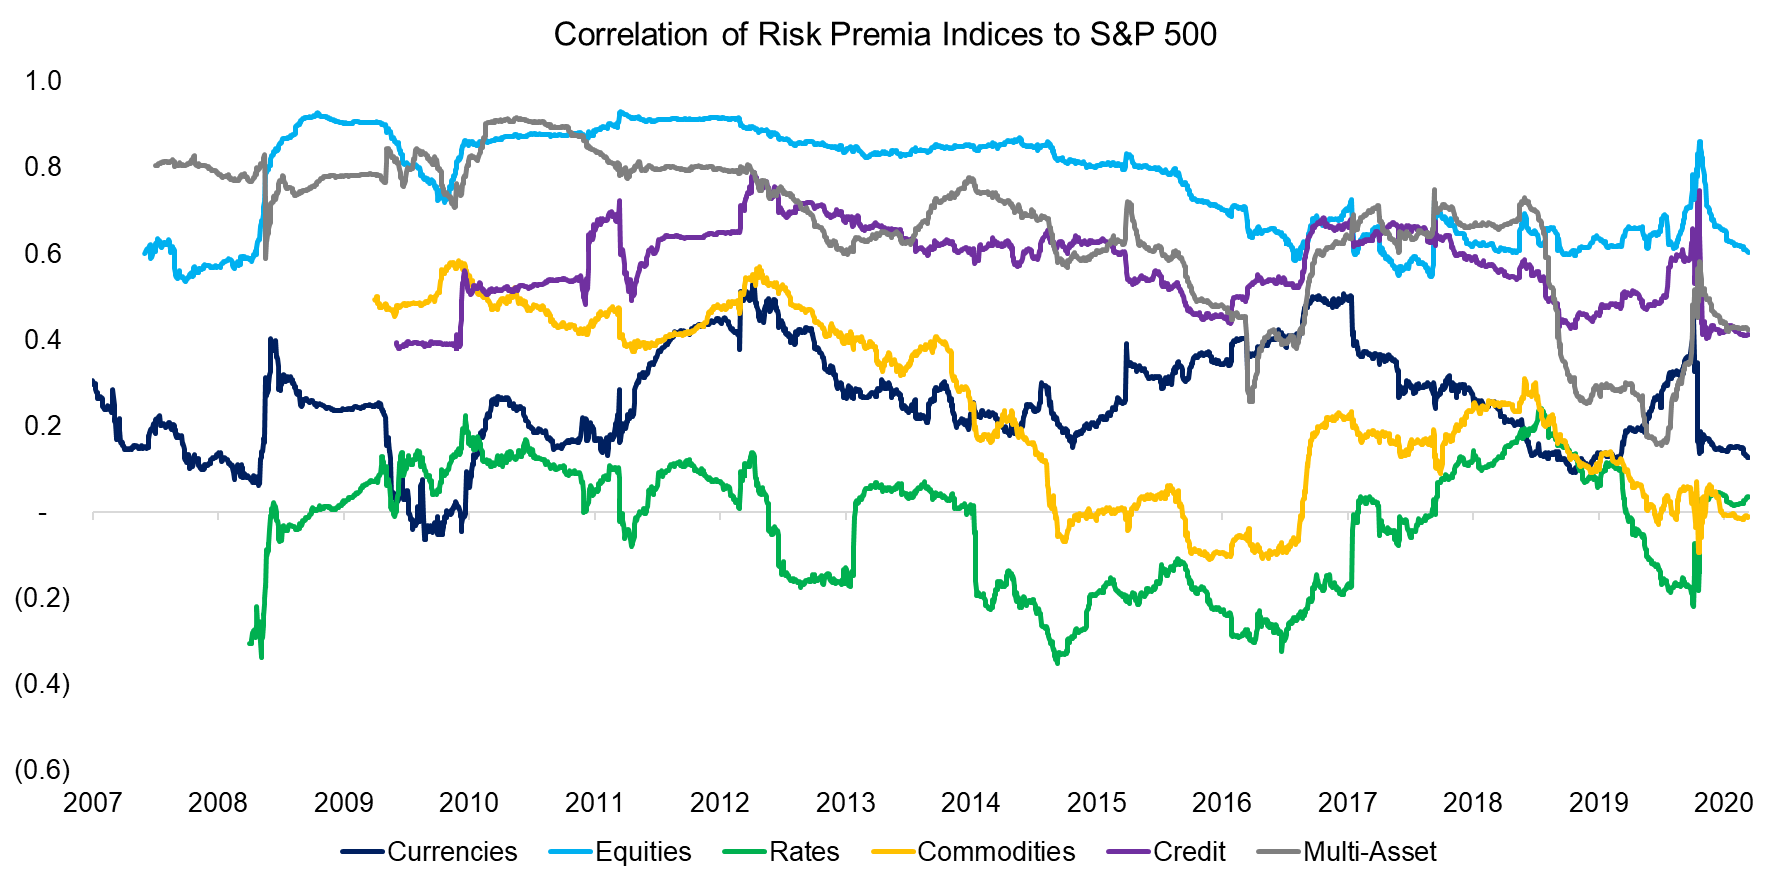 Correlation of Risk Premia Indices to S&P 500i